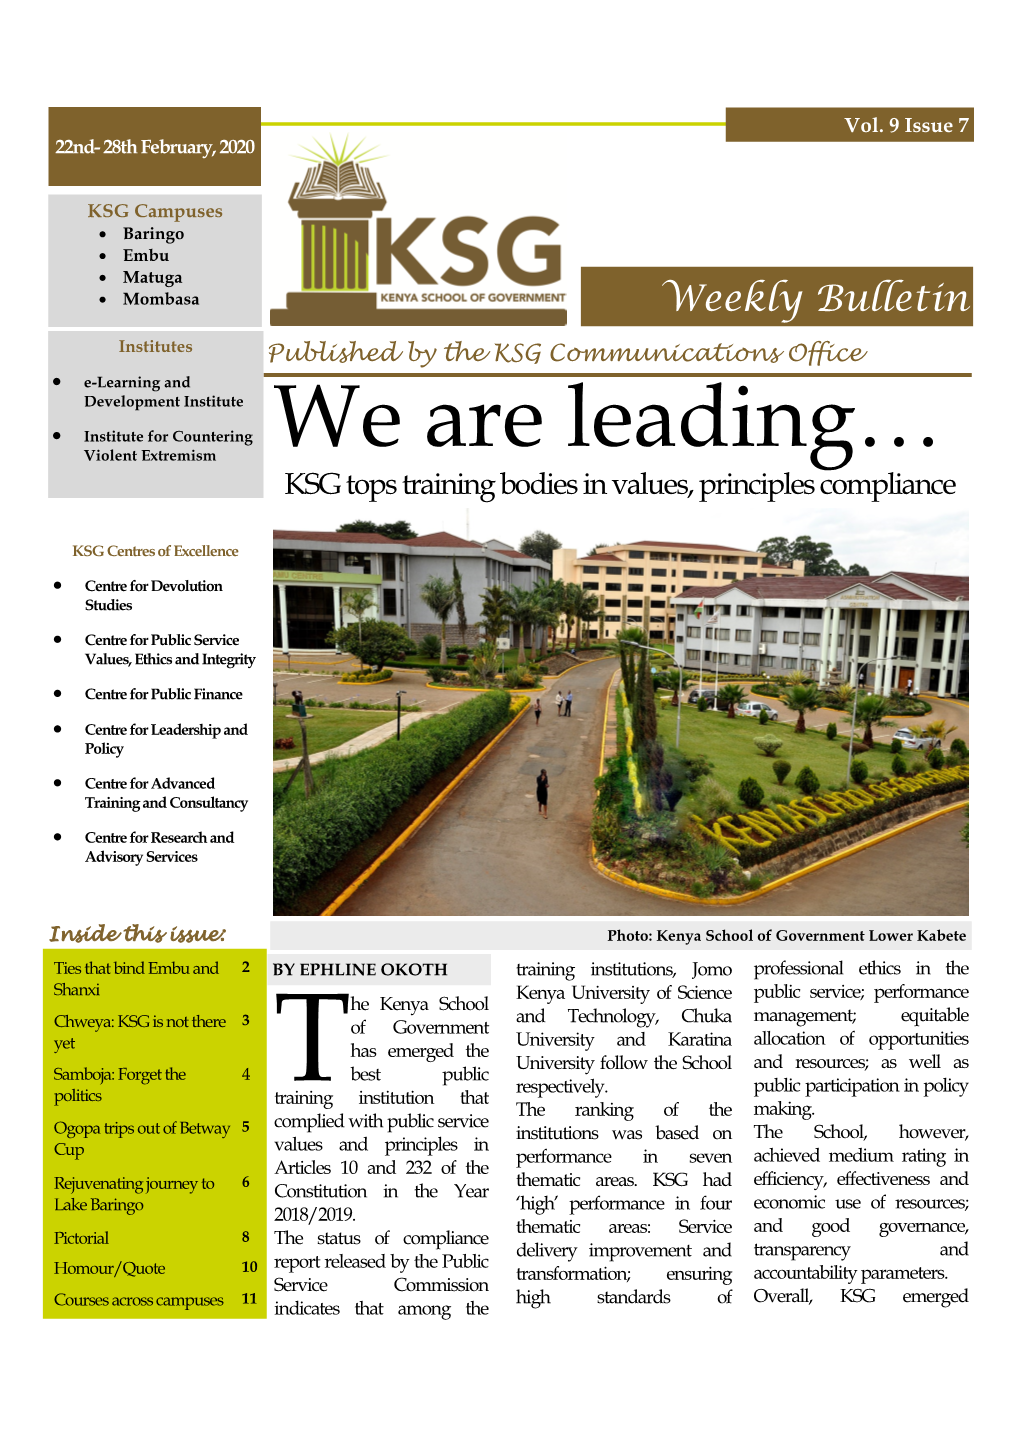 We Are Leading… KSG Tops Training Bodies in Values, Principles Compliance